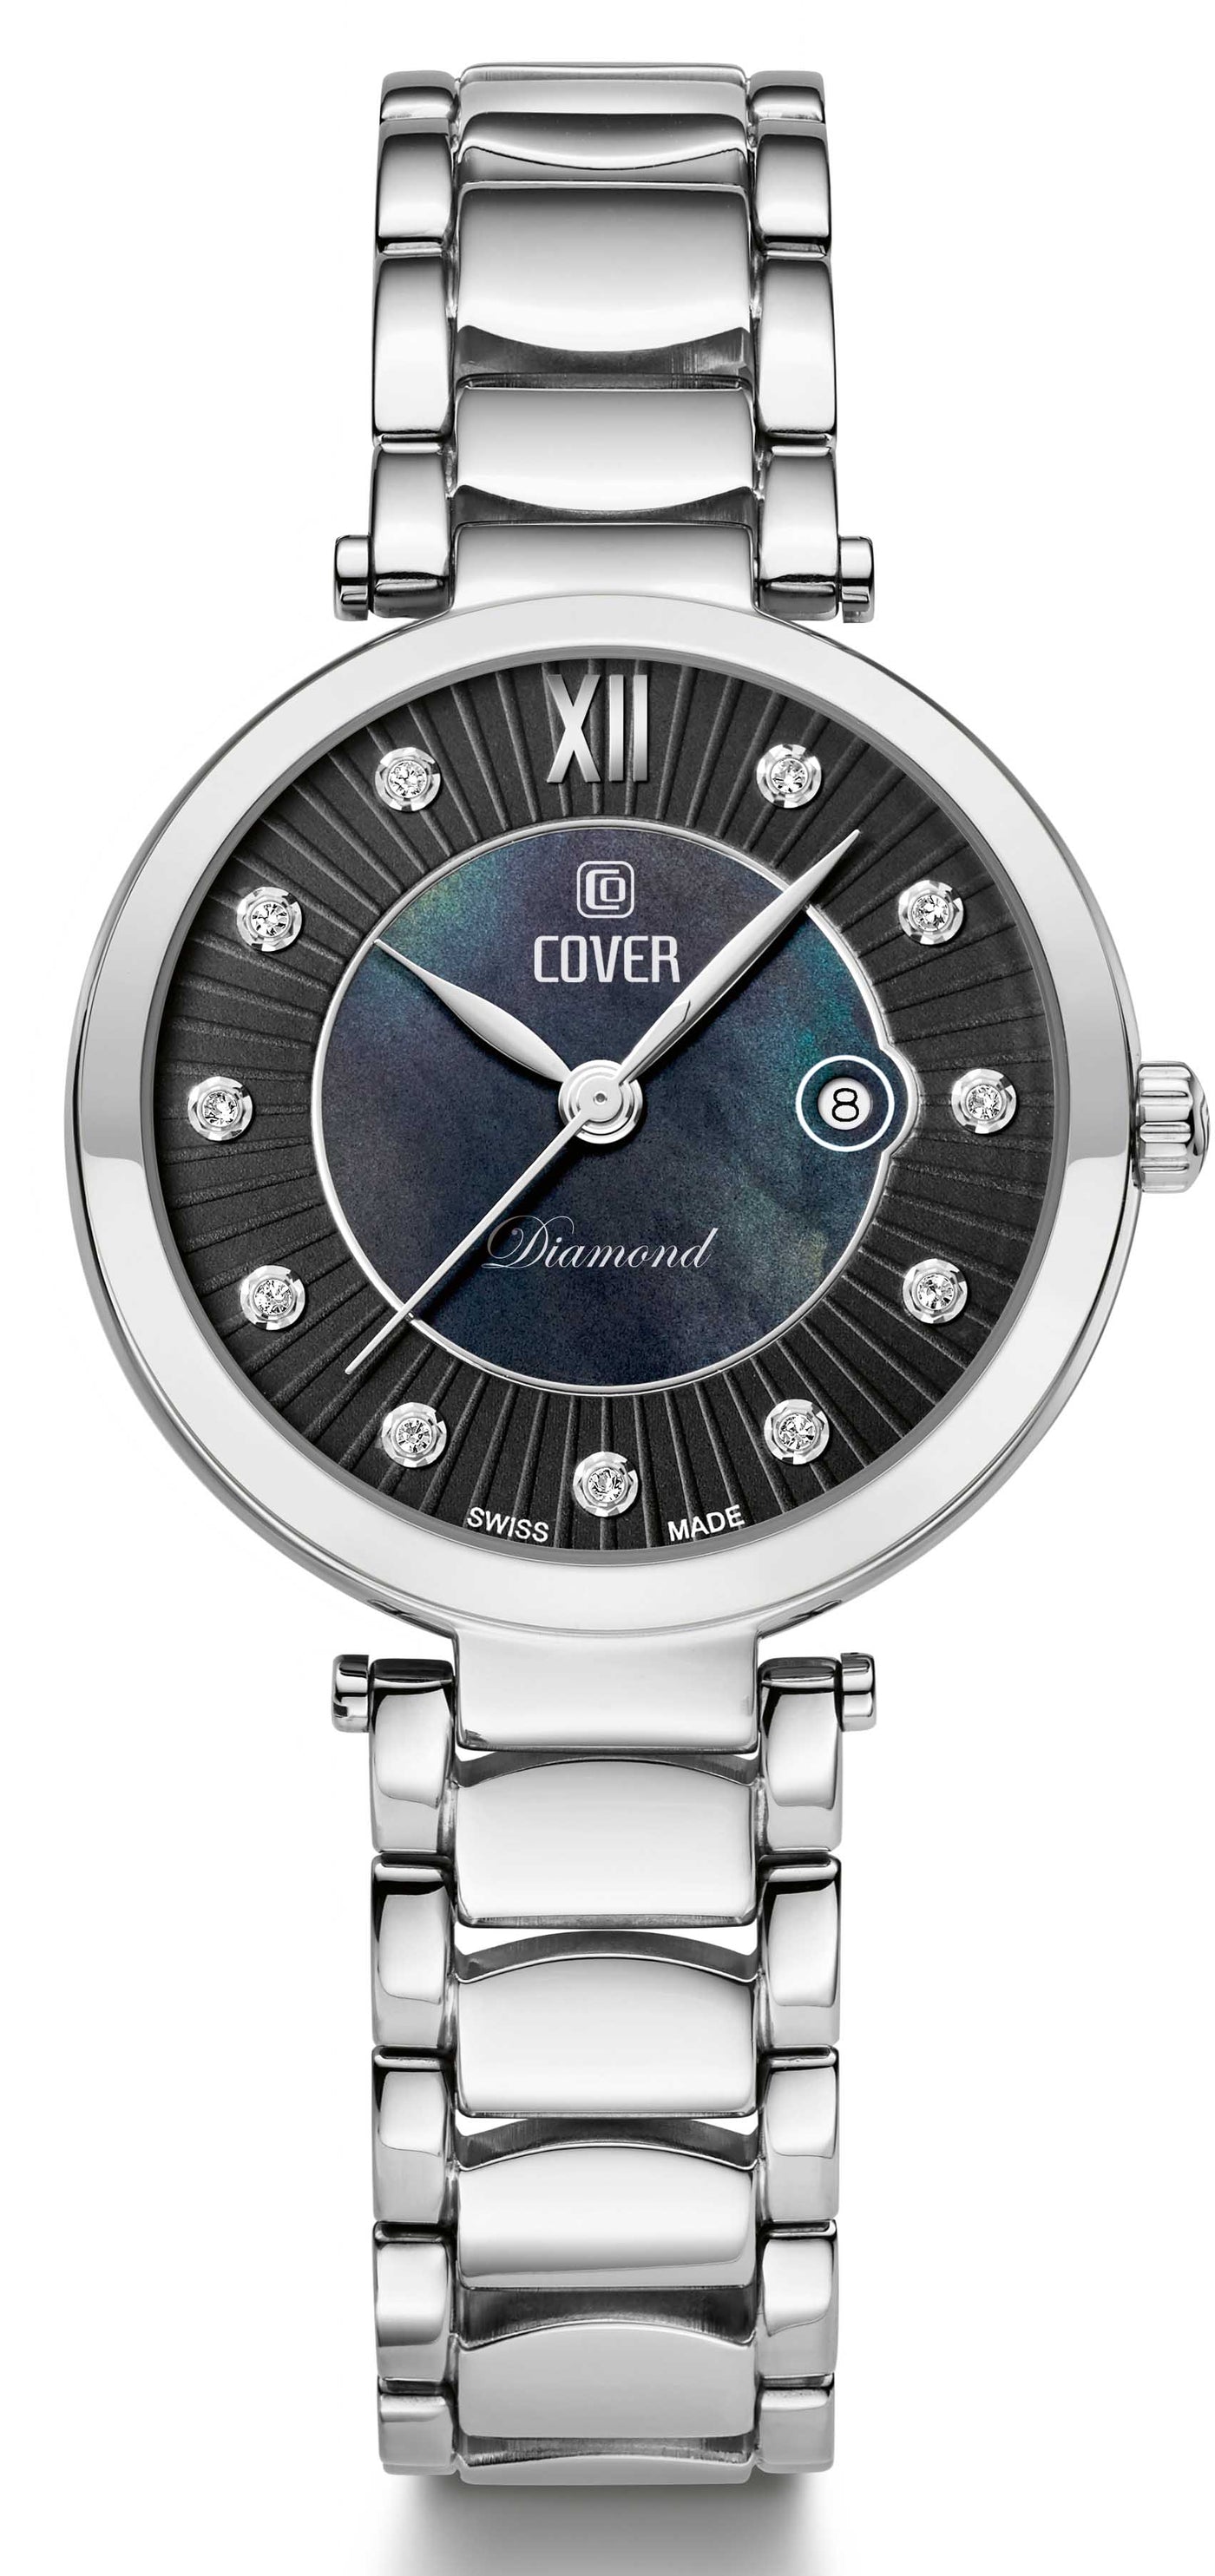 COVER LADY DIAMOND LIMITED EDITION CO188.01 WOMEN WATCH